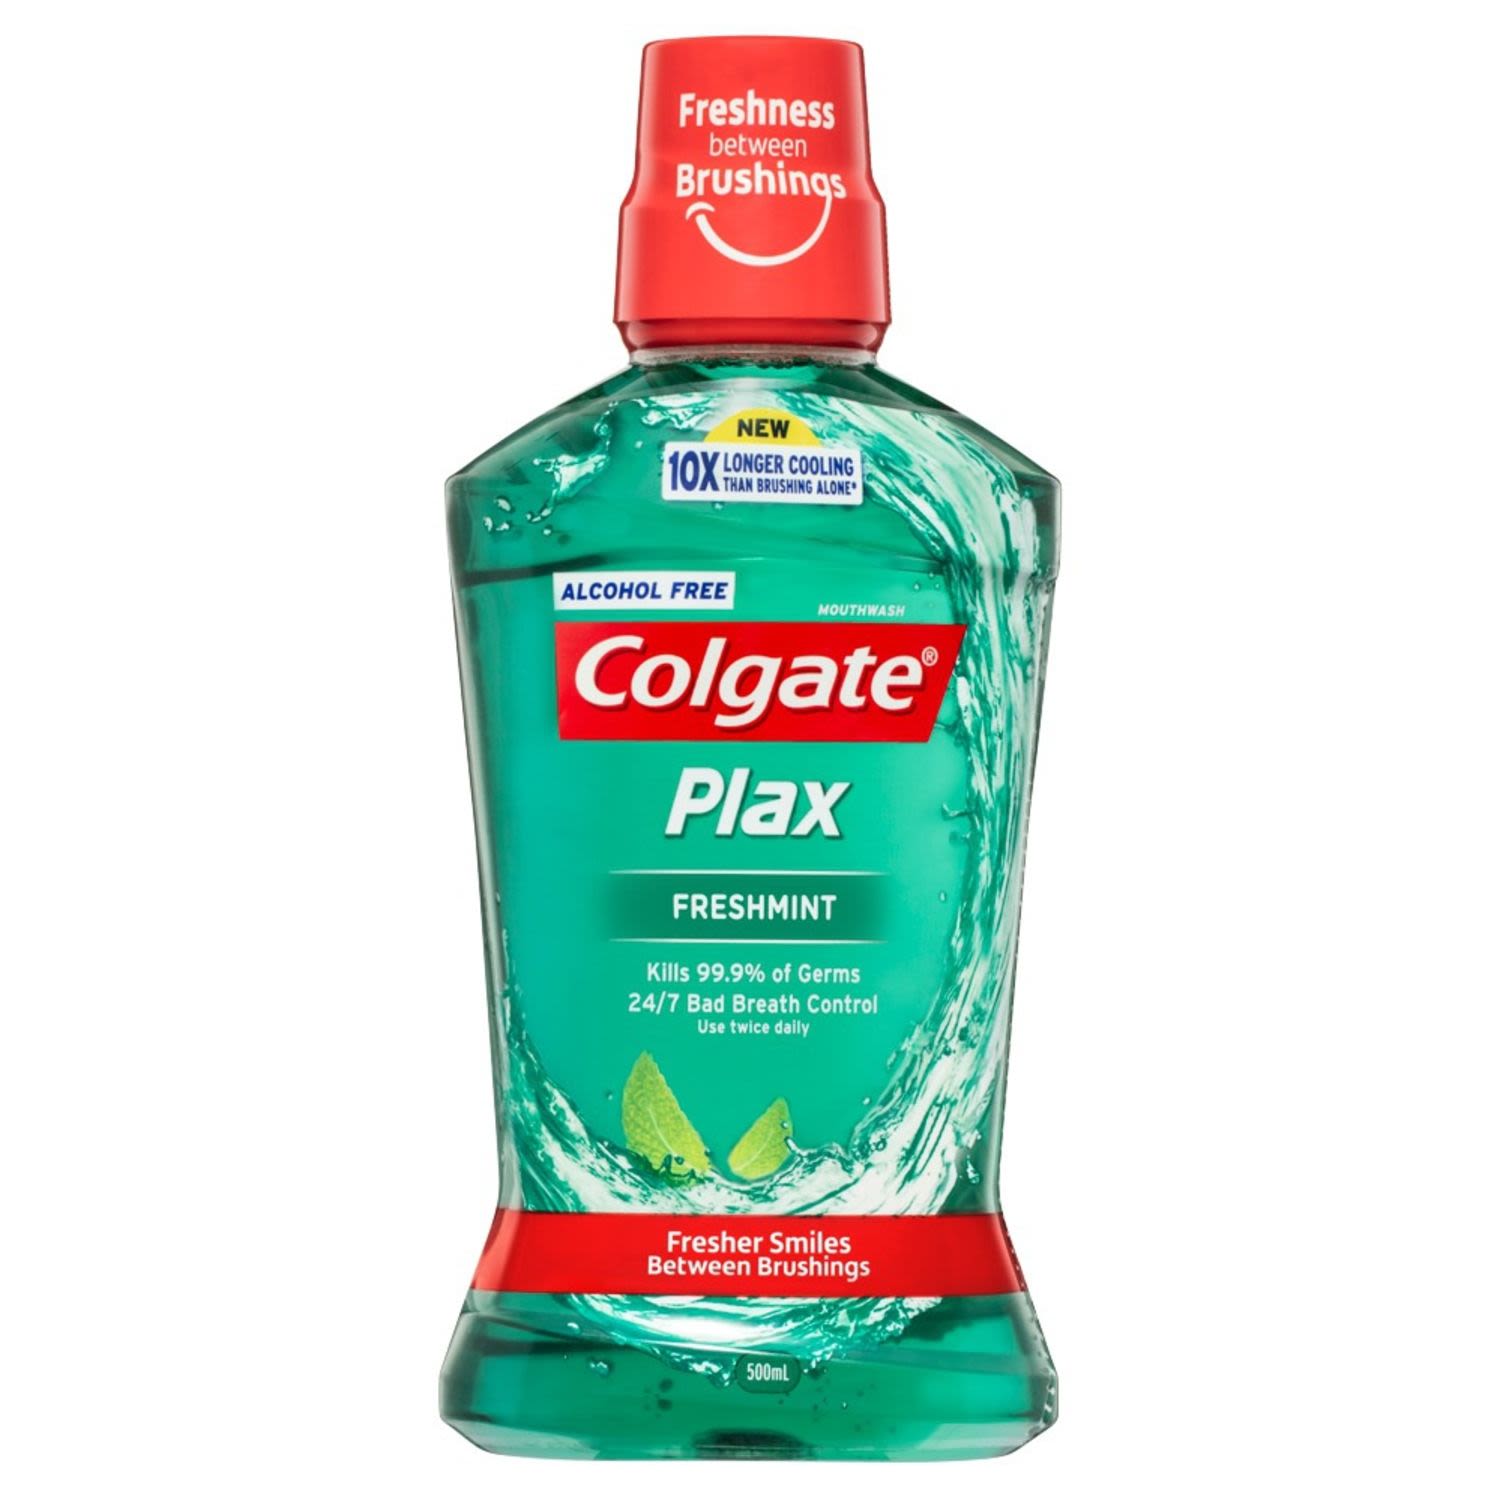 Colgate Plax Antibacterial Alcohol Free Mouthwash kills 99.9% of germs and provides 24/7 bad breath control when used twice daily. Colgate Plax provides a cooling sensation that lasts 10x longer than brushing alone. Use twice daily for a healthier, fresher mouth.

When used after proper brushing and flossing, Colgate Plax mouthwash helps deliver a plaque-control system. It works to further rid the mouth of bacteria that may linger on the tongue and inner cheeks, and helps stop new plaque from forming on and between teeth, as well as just below the gum-line. Colgate Plax forms a protective barrier shield to neutralise the effects of bacteria and plaque for 12 hours.

Start your day with great fresh breath, protecting your mouth from bacteria and plaque for up to 12 hours. Finish your day with Colgate Plax to help ensure better Oral Hygiene and fresher start for the following morning. Clinically tested by dentists.


What is bad breath? Bad breath, also known as Halitosis, is foul-smelling breath.

What causes bad breath? Bad breath (halitosis) can be caused by a number of things including poor oral hygiene, the foods you eat (garlic and onions, in particular), smoking, alcohol, gum disease, diabetes, dry mouth, sinus or throat infections and gastrointestinal issues.

Top 3 ways to treat bad breath:
Brush teeth twice a day with a fluoride toothpaste and floss daily.
Use a tongue scraper to eliminate odour-causing bacteria on the tongue.
Visit the dentist twice a year for cleanings and checkups.

Mouthwash for bad breath: Colgate Plax provides a cooling sensation that lasts 10X longer than brushing alone and offers 24/7 bad breath control, with twice daily use.<br /> <br />